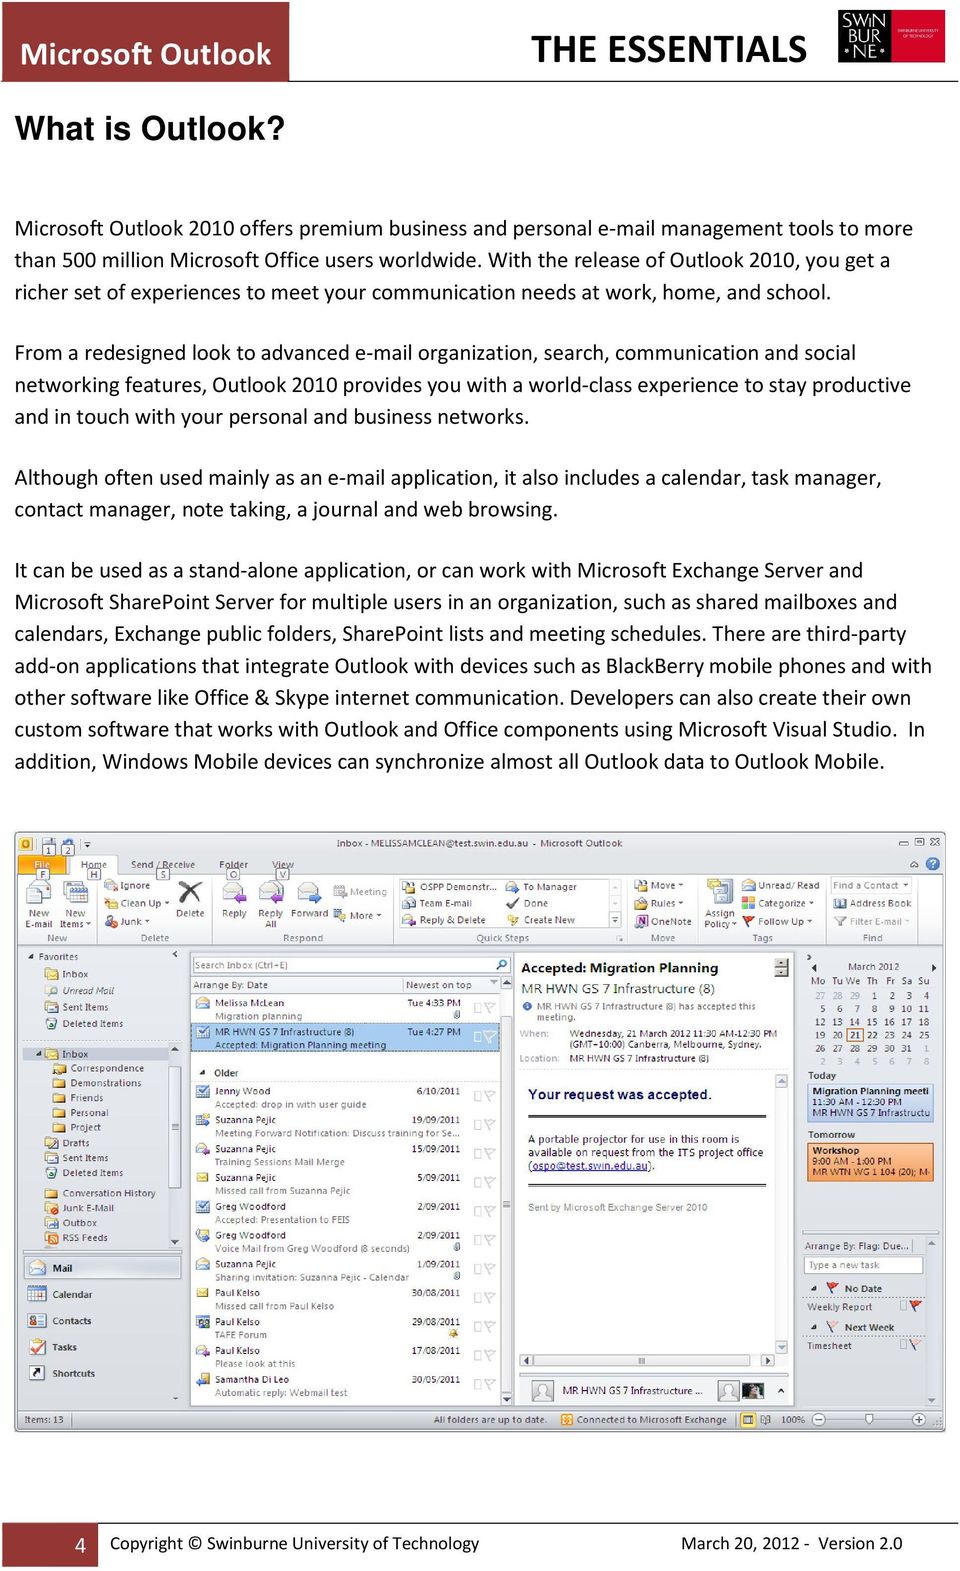 From a redesigned look to advanced e-mail organization, search, communication and social networking features, Outlook 2010 provides you with a world-class experience to stay productive and in touch